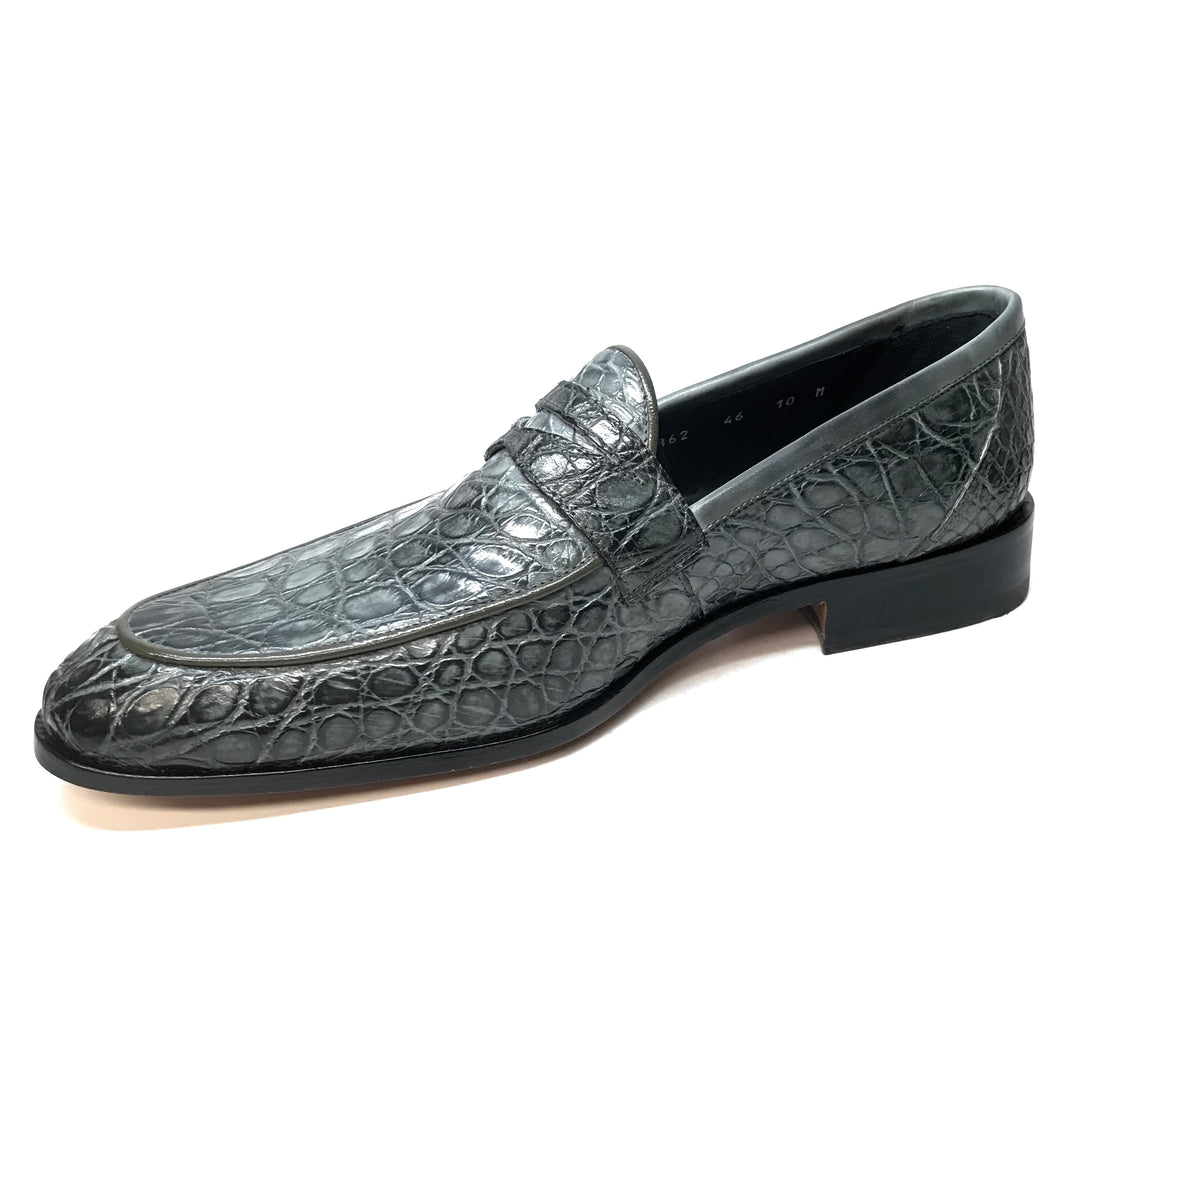 Mauri 4862 Forest Green Crocodile Belly Penny Loafers - Dudes Boutique